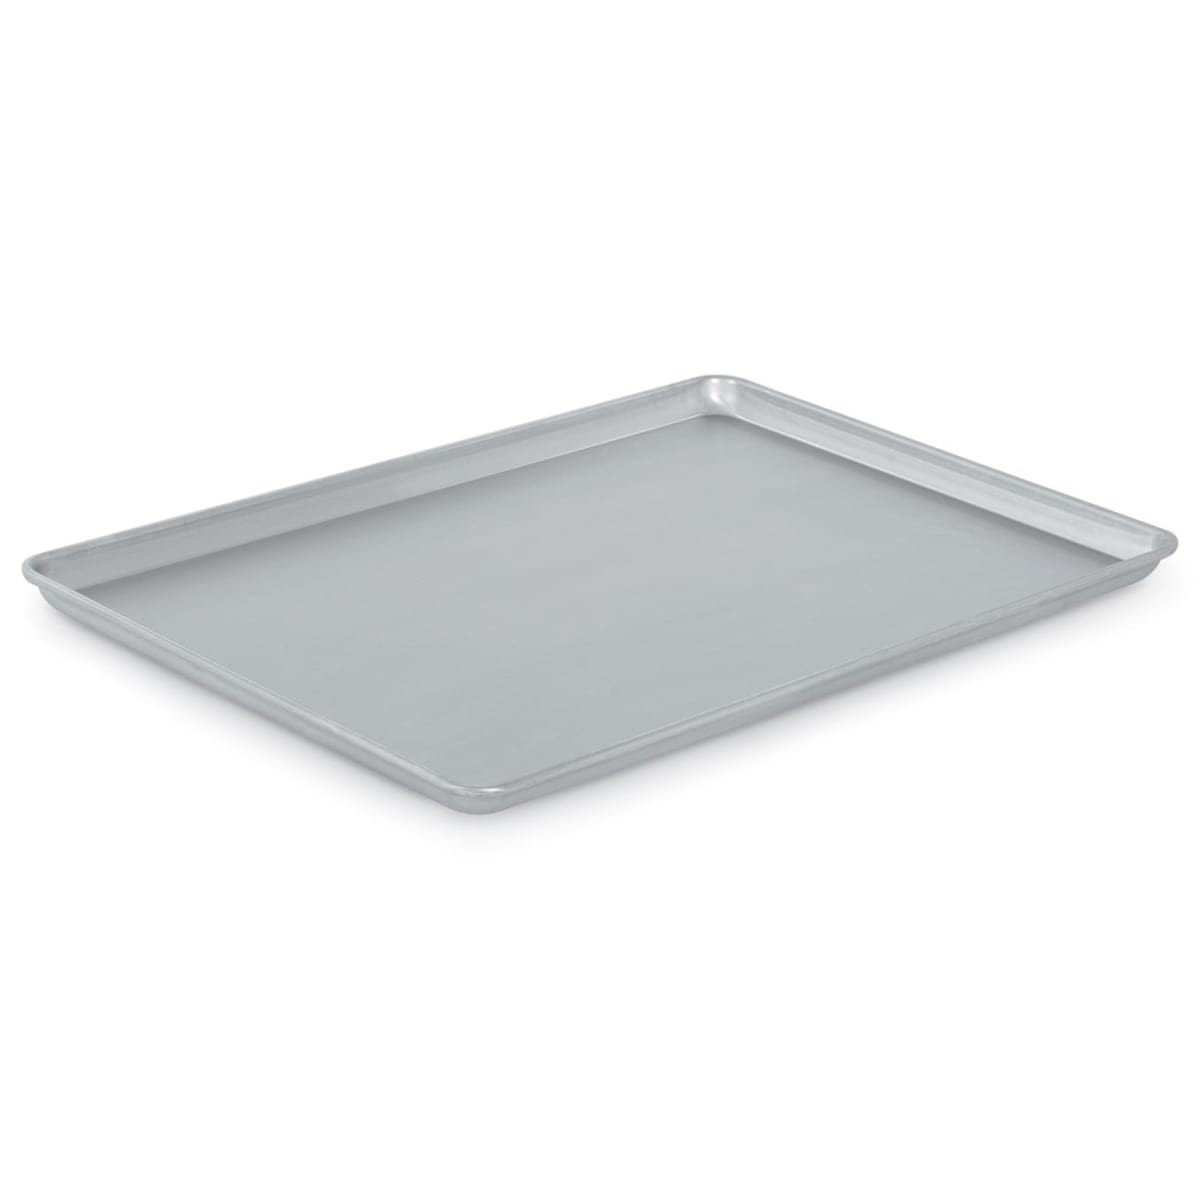 Vollrath 9002CV Sheet Pan Cover, Full-Size, Snap-On